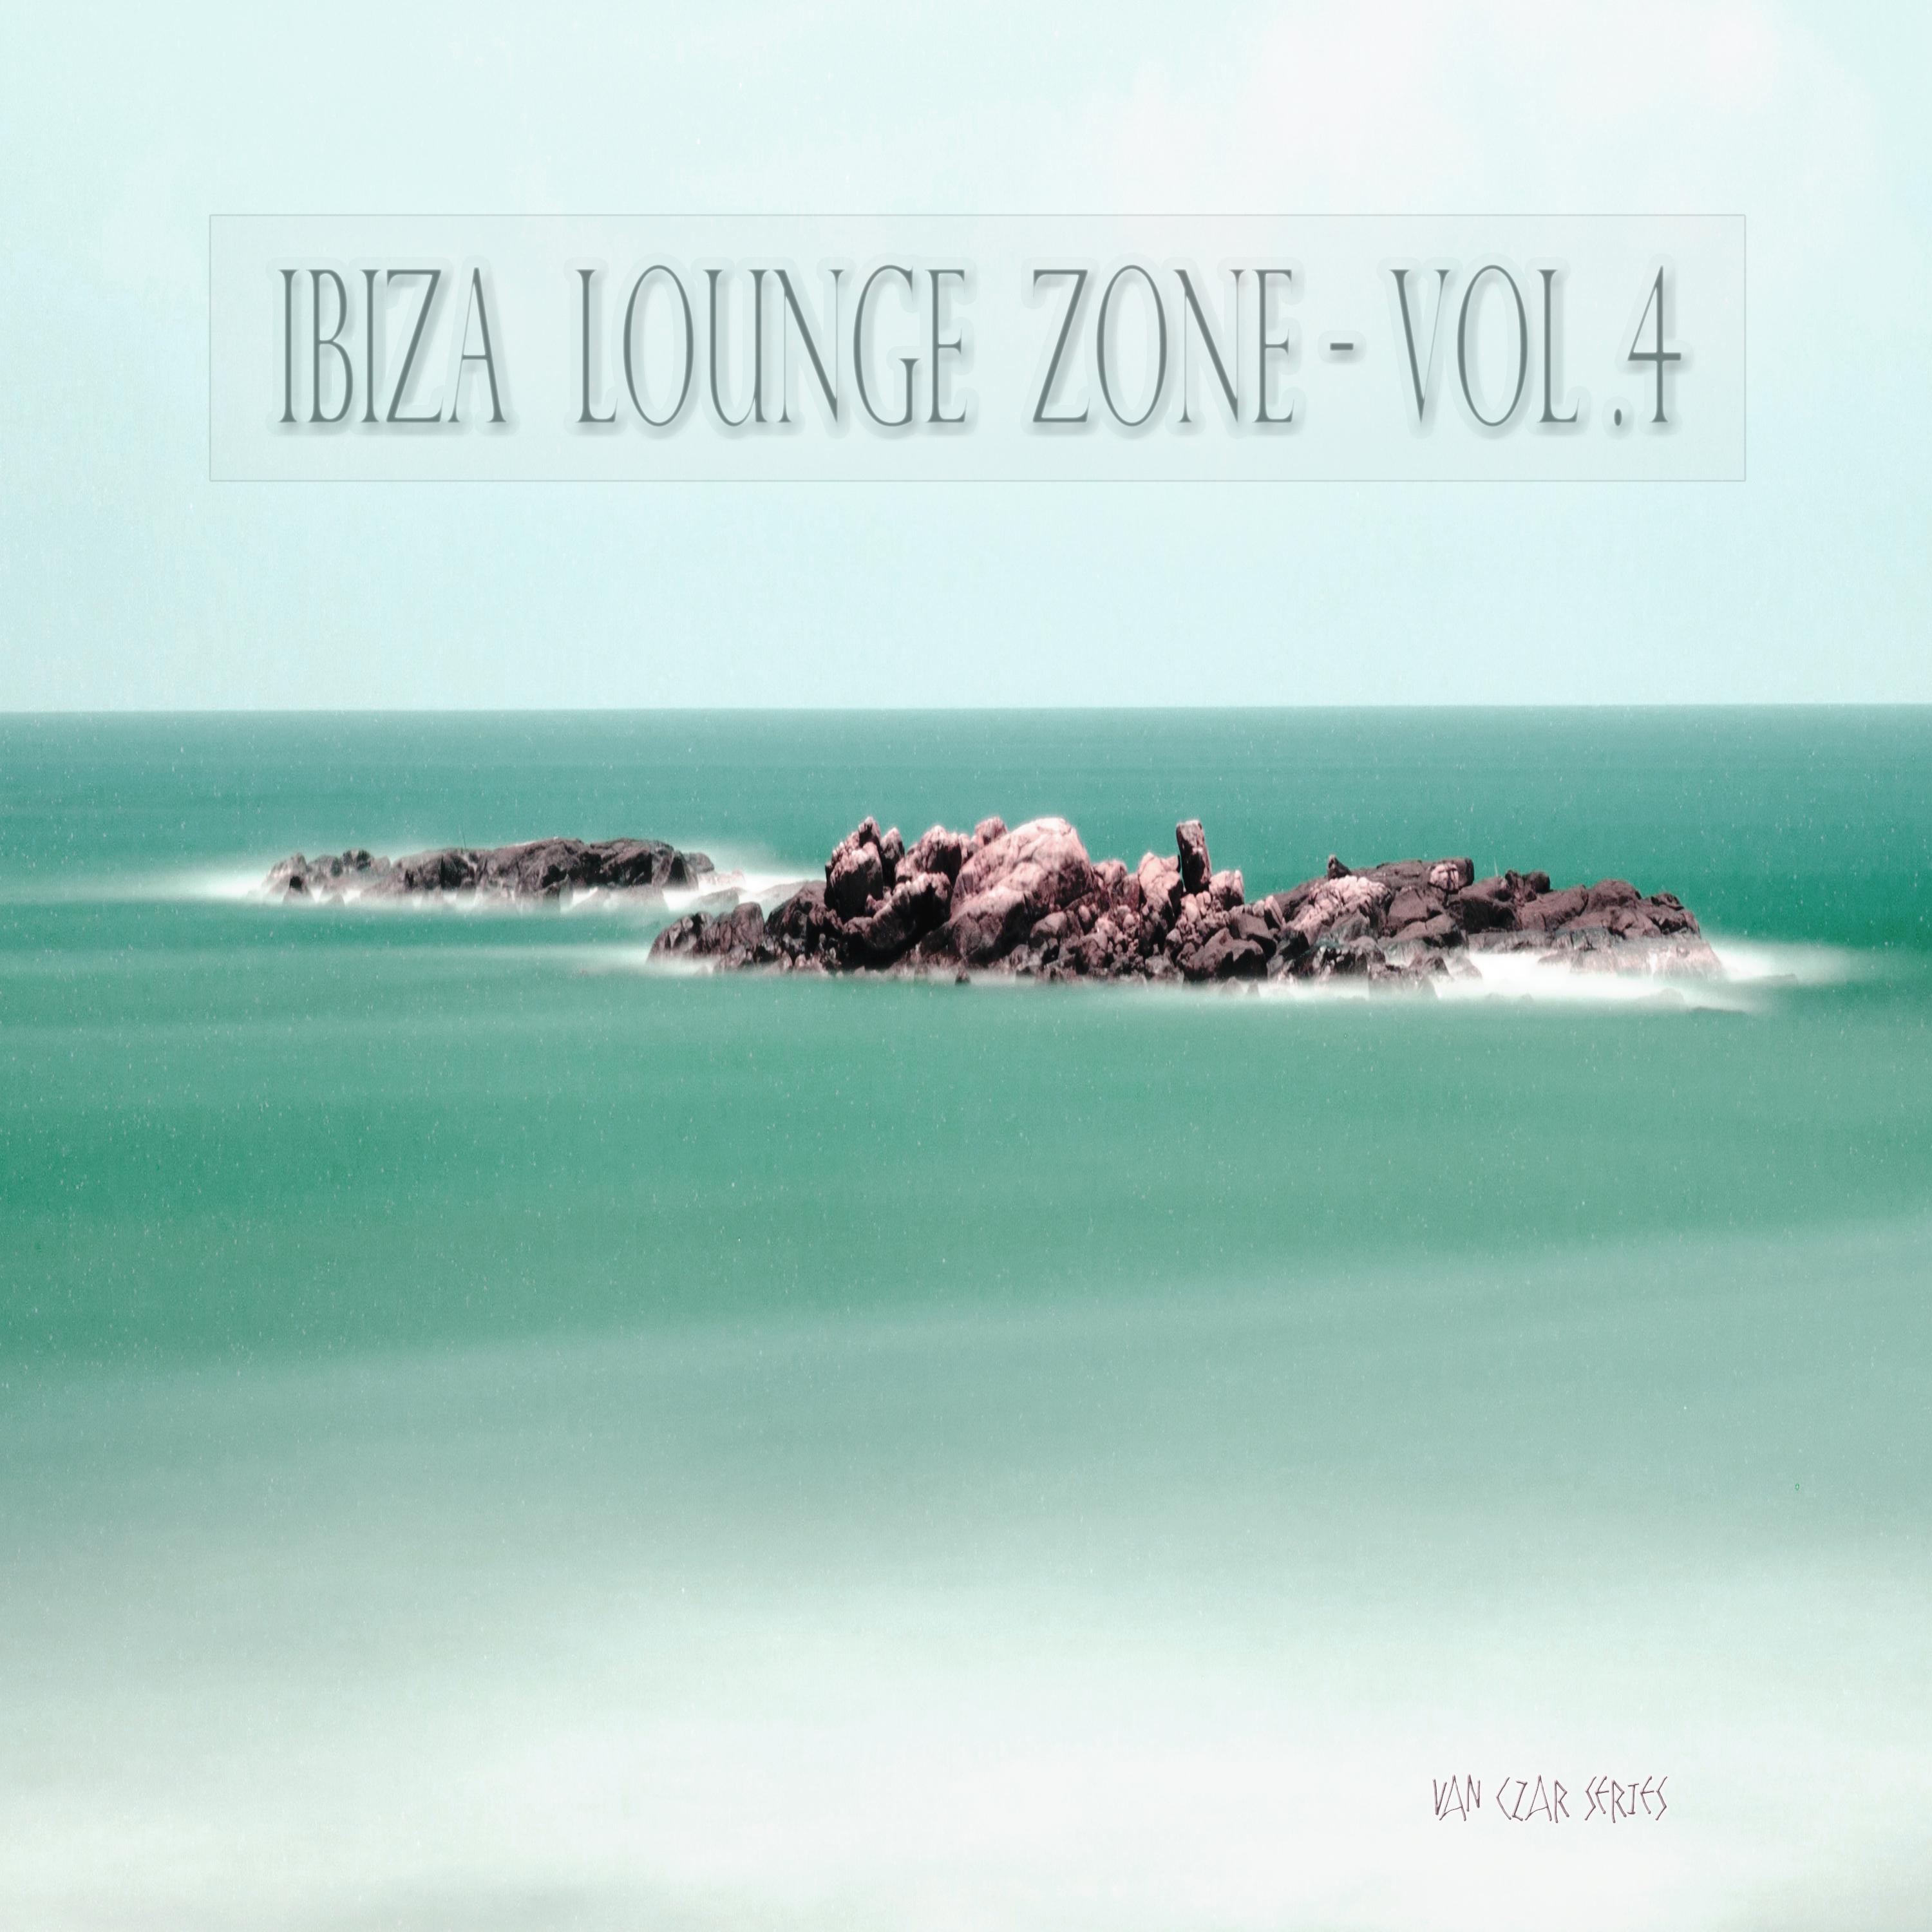 Ibiza Lounge Zone, Vol. 4 (Compiled & Mixed by Van Czar)